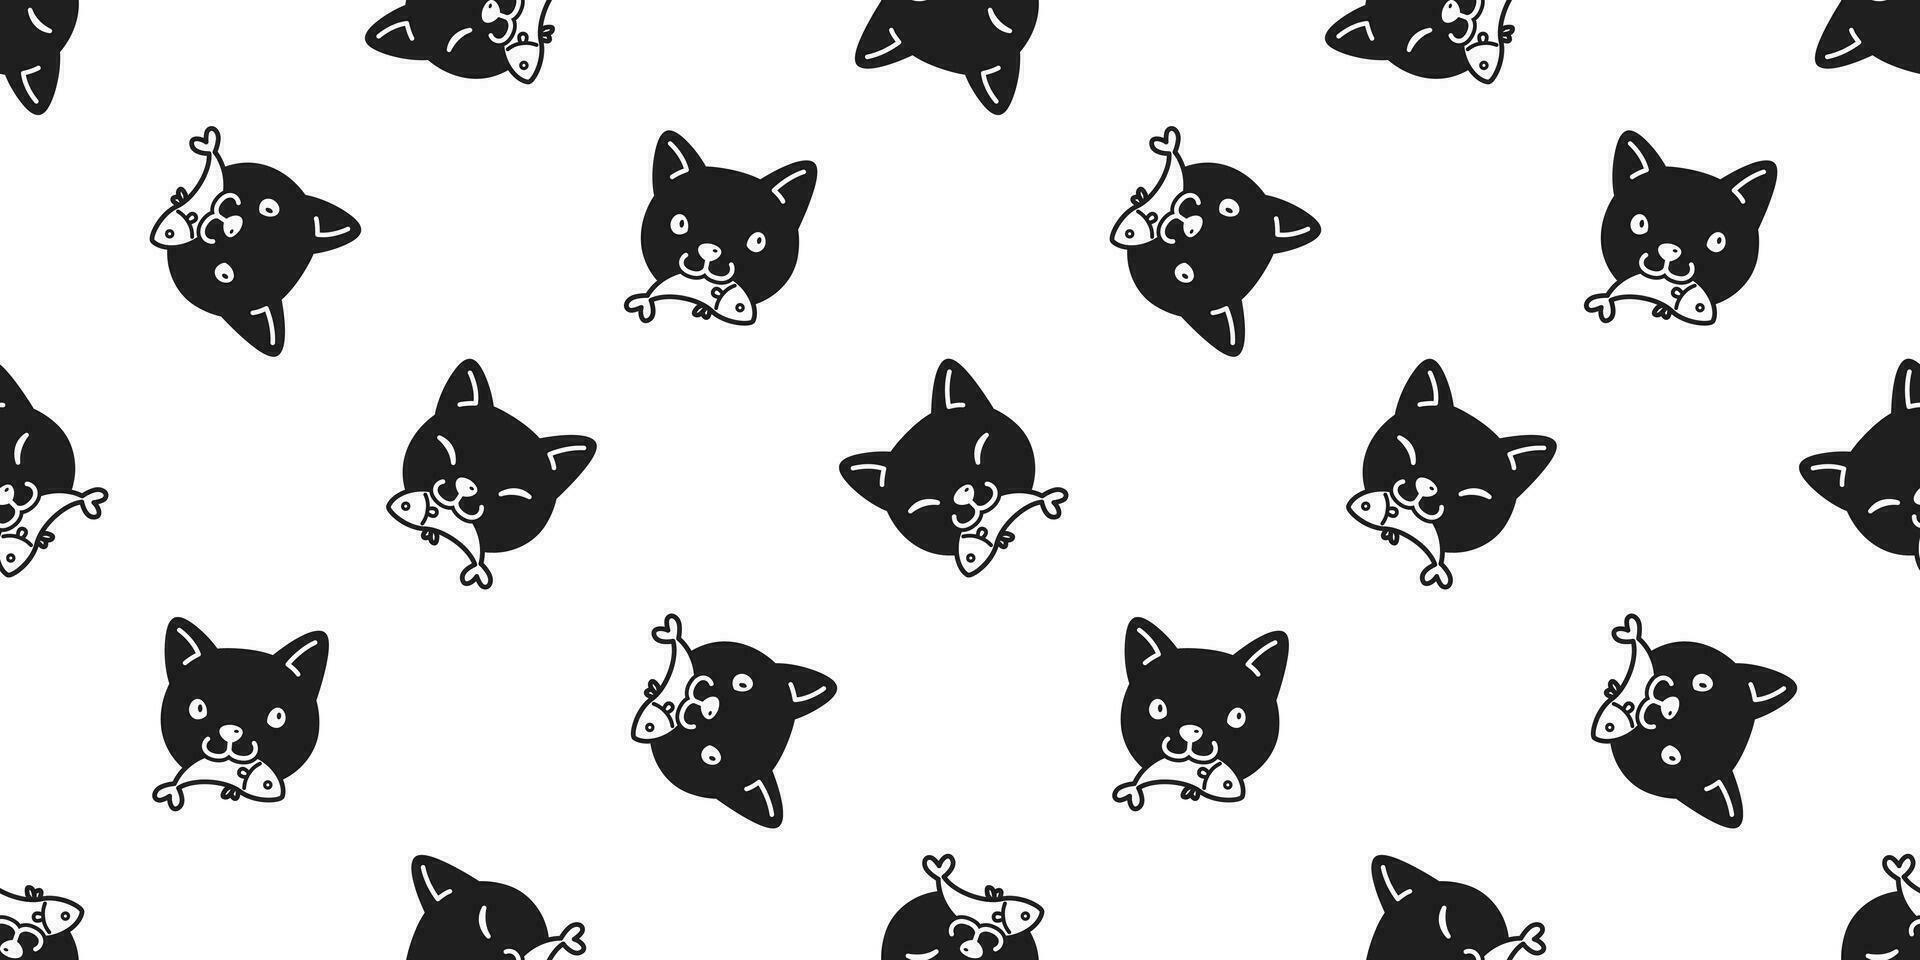 cat seamless pattern vector calico kitten eating fish salmon tuna scarf isolated cartoon repeat wallpaper tile background illustration doodle black